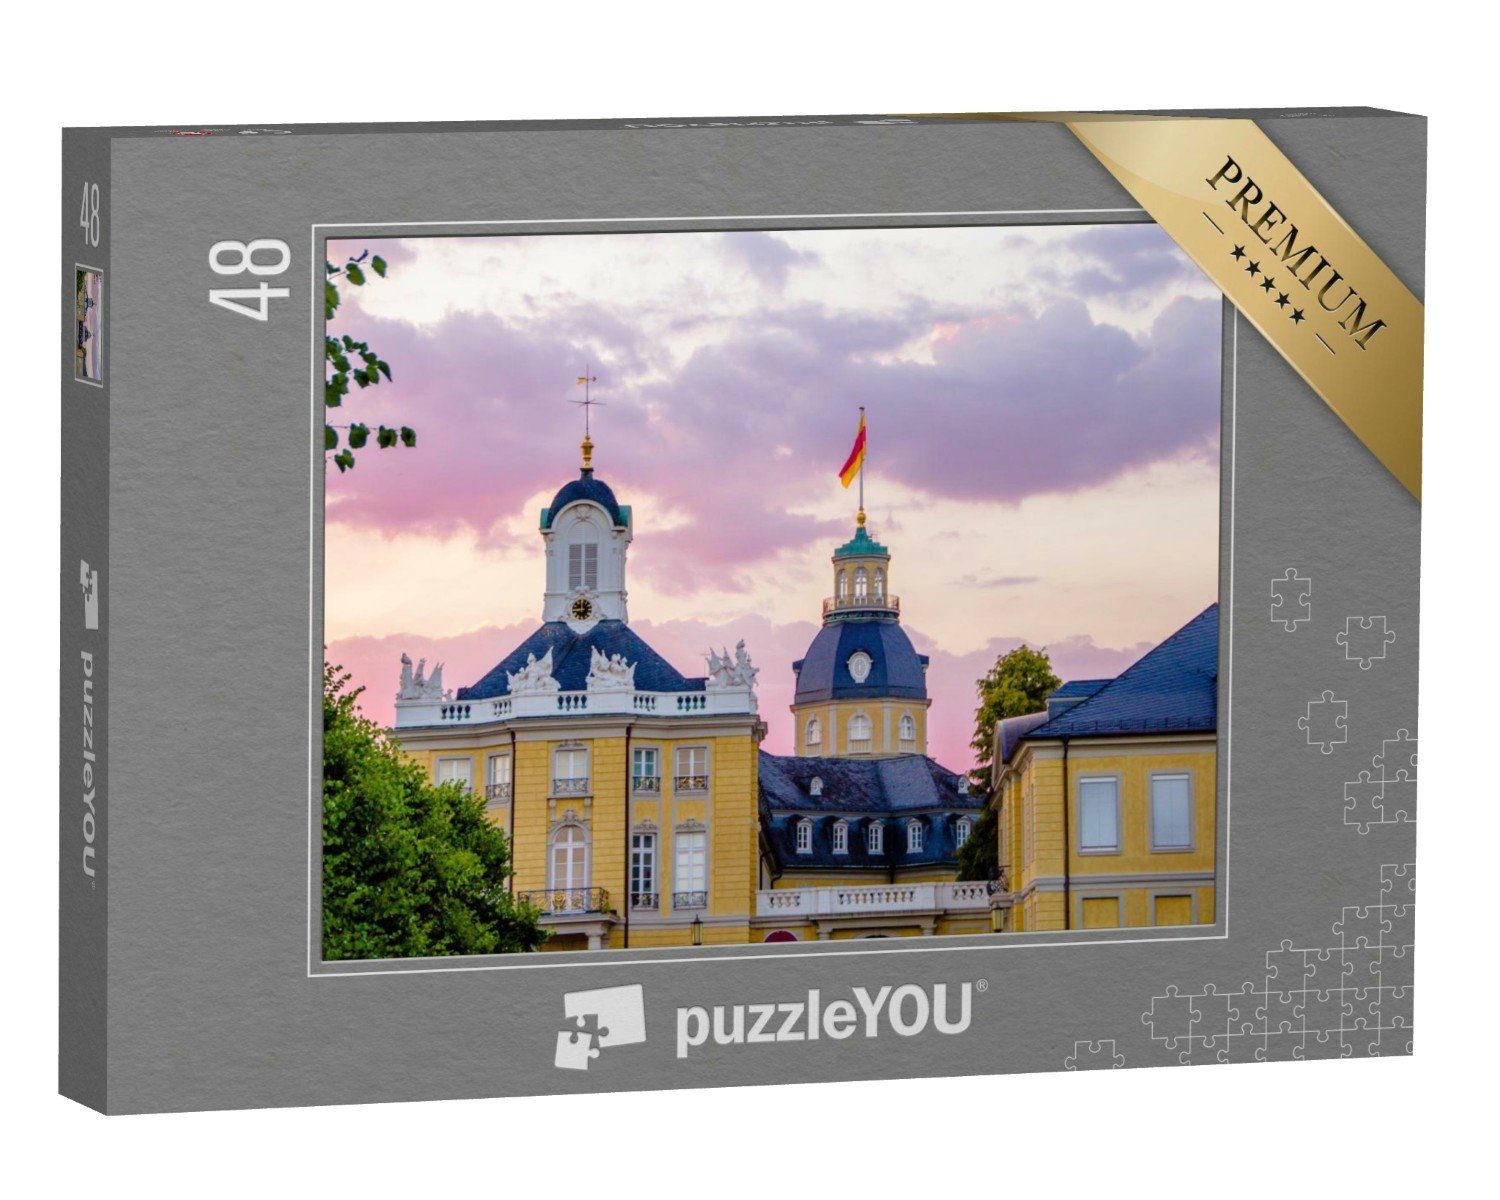 puzzleYOU Puzzle Schloss in Karlsruhe, Deutschland, 48 Puzzleteile, puzzleYOU-Kollektionen Karlsruhe